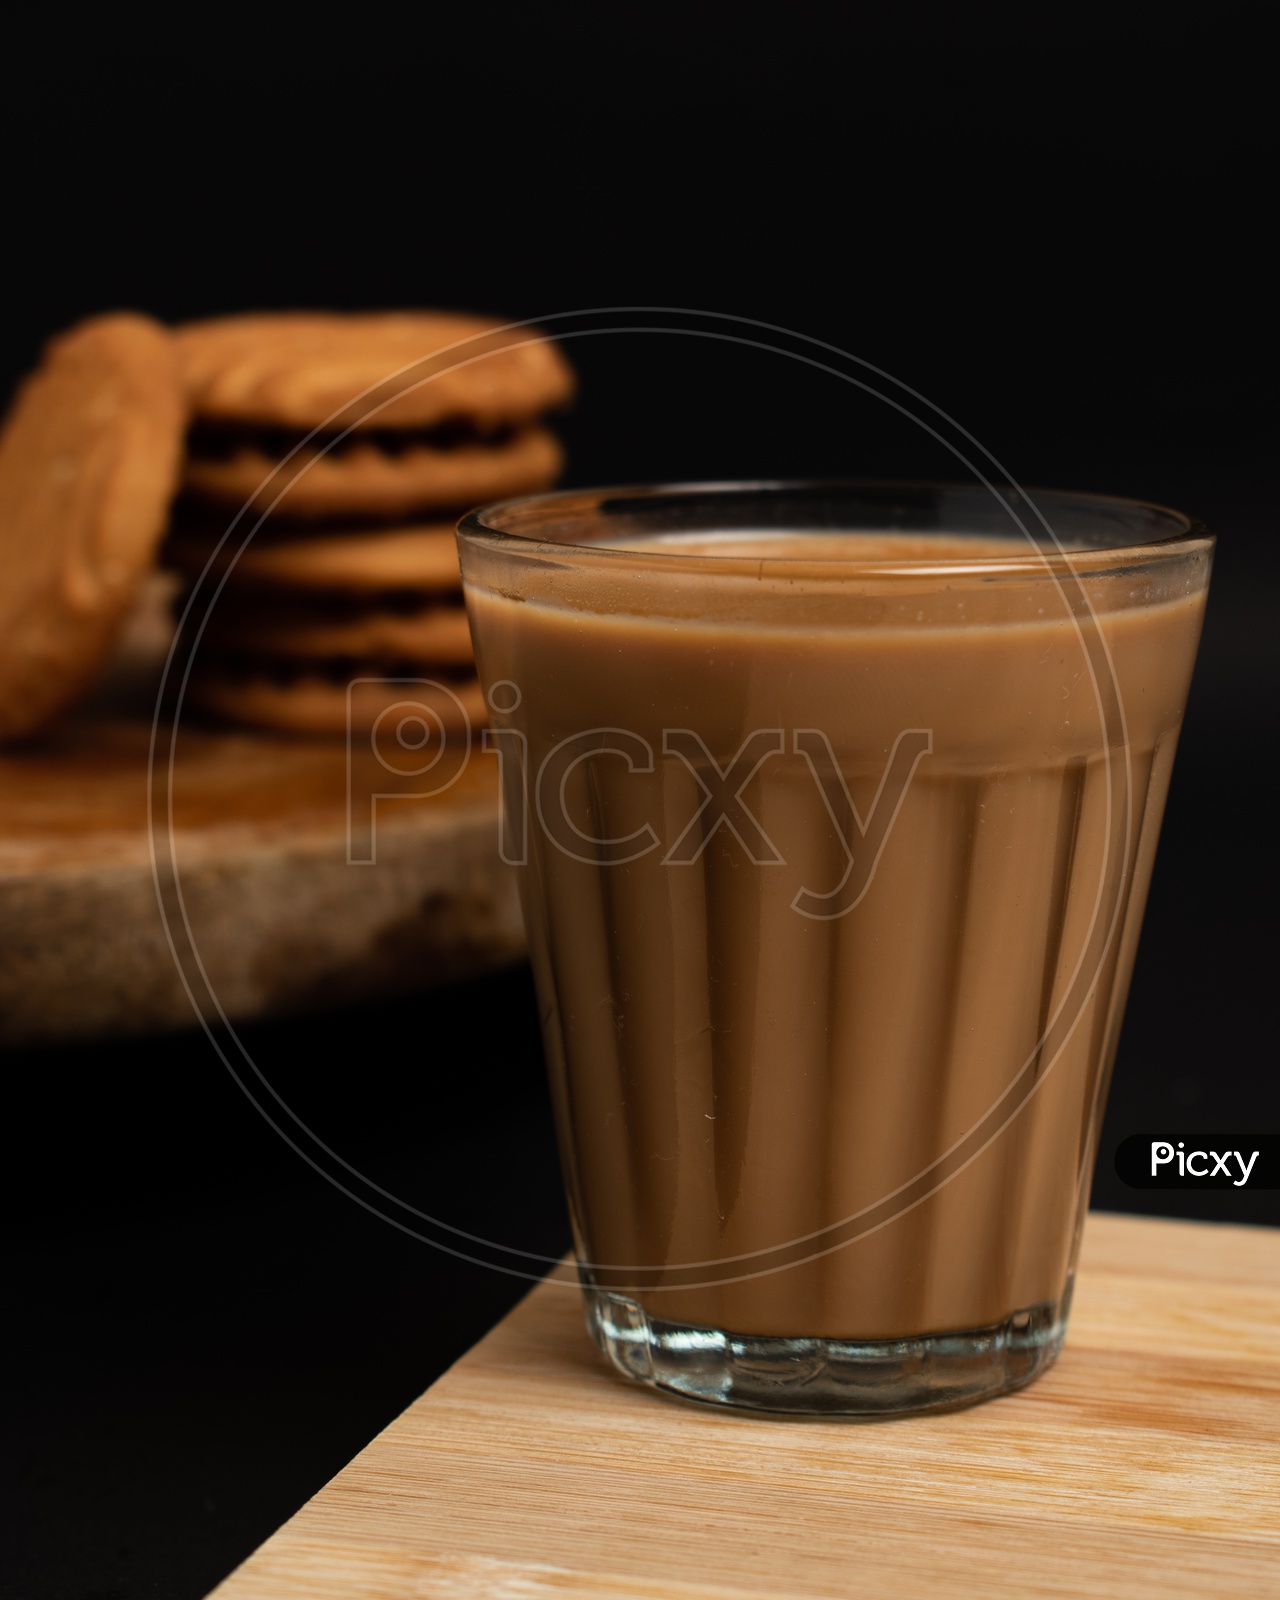 Aromatic beverage Tea/chai   with Good-day biscuits placed on wooden plates on a black background.